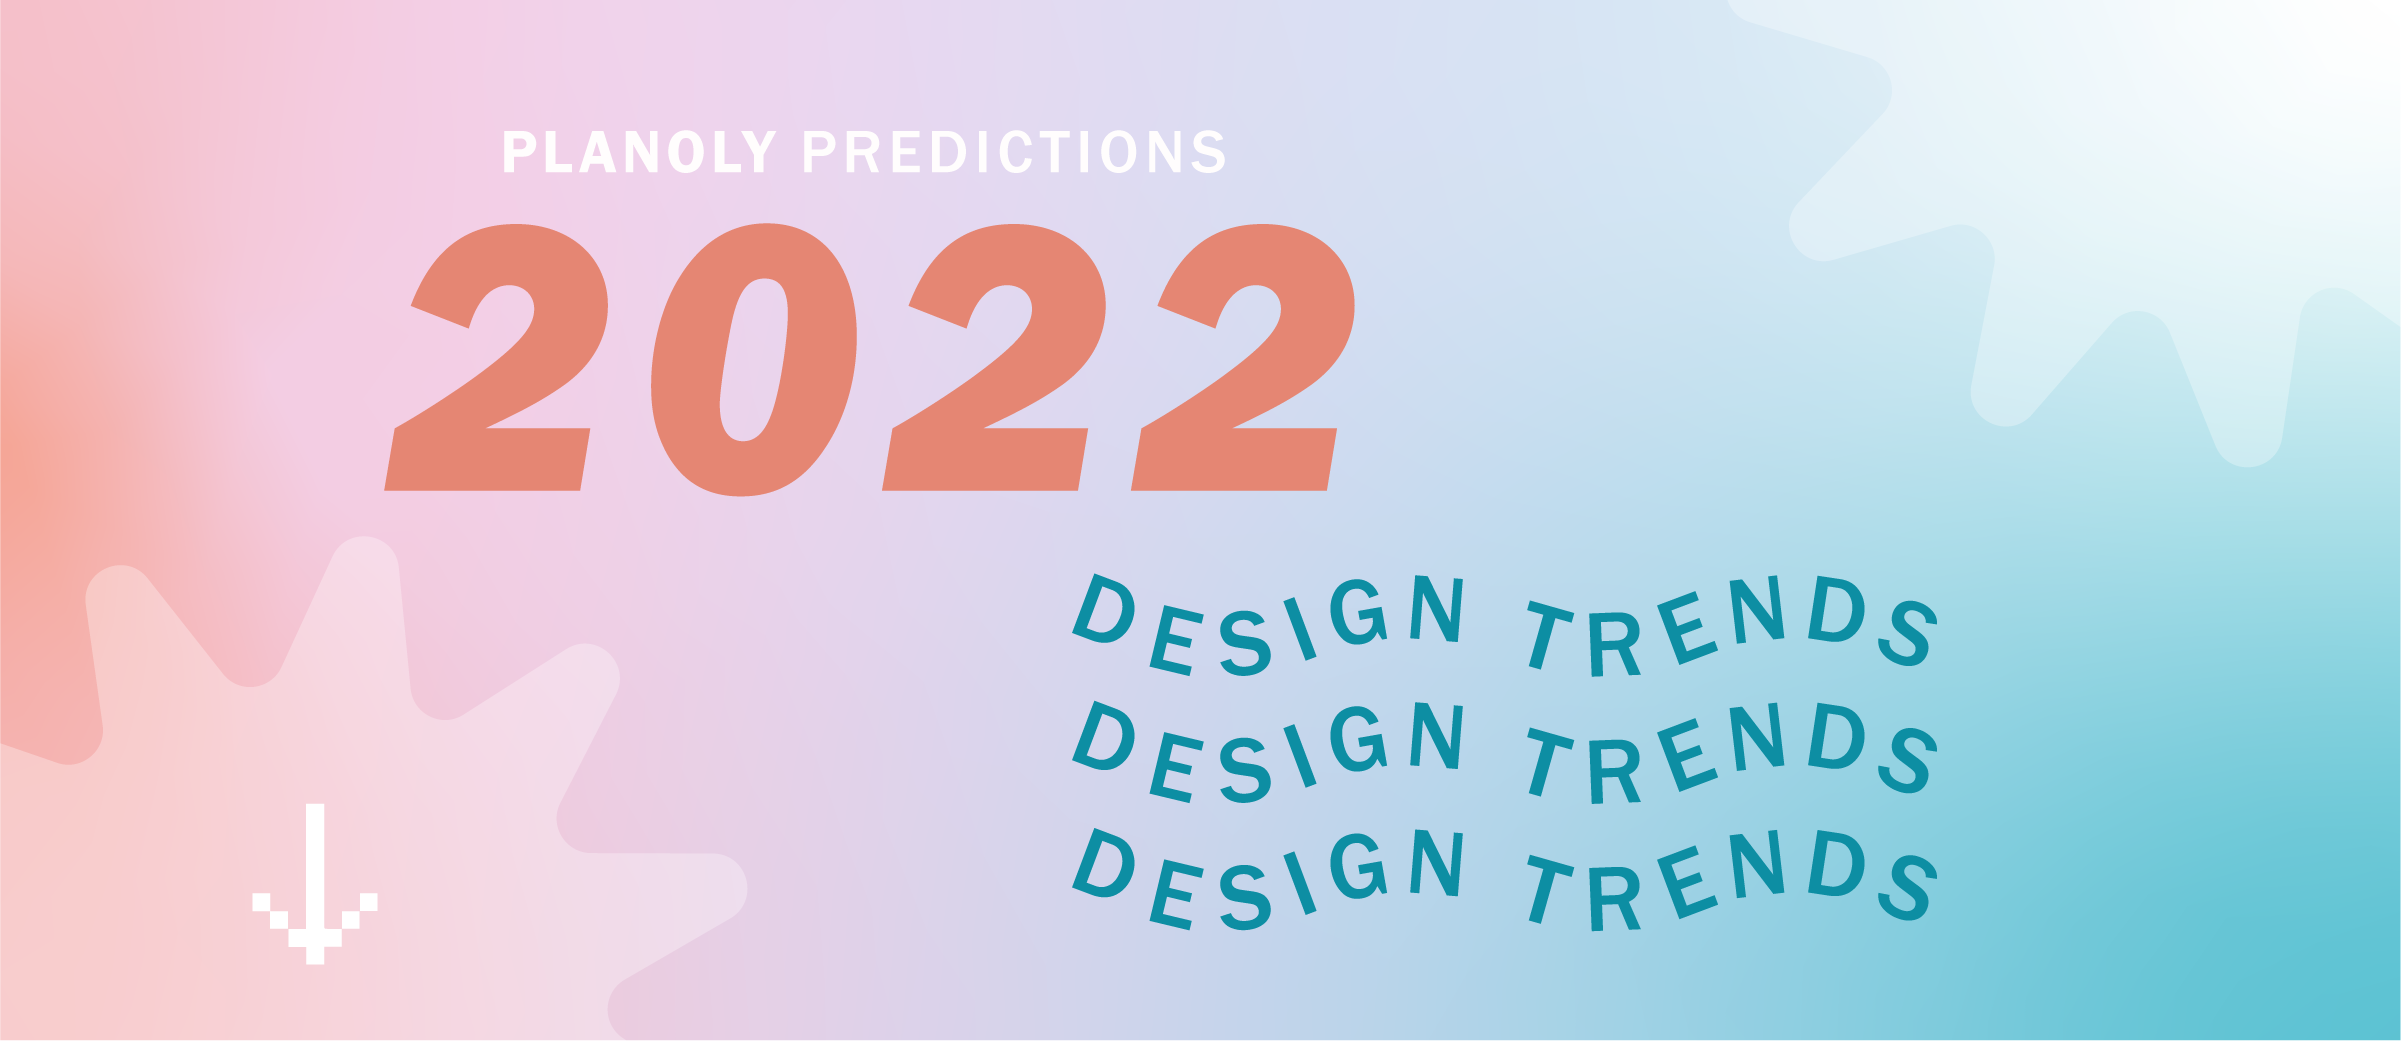 Read about Top Graphic Design Trends to Look out For in 2022, on PLANOLY